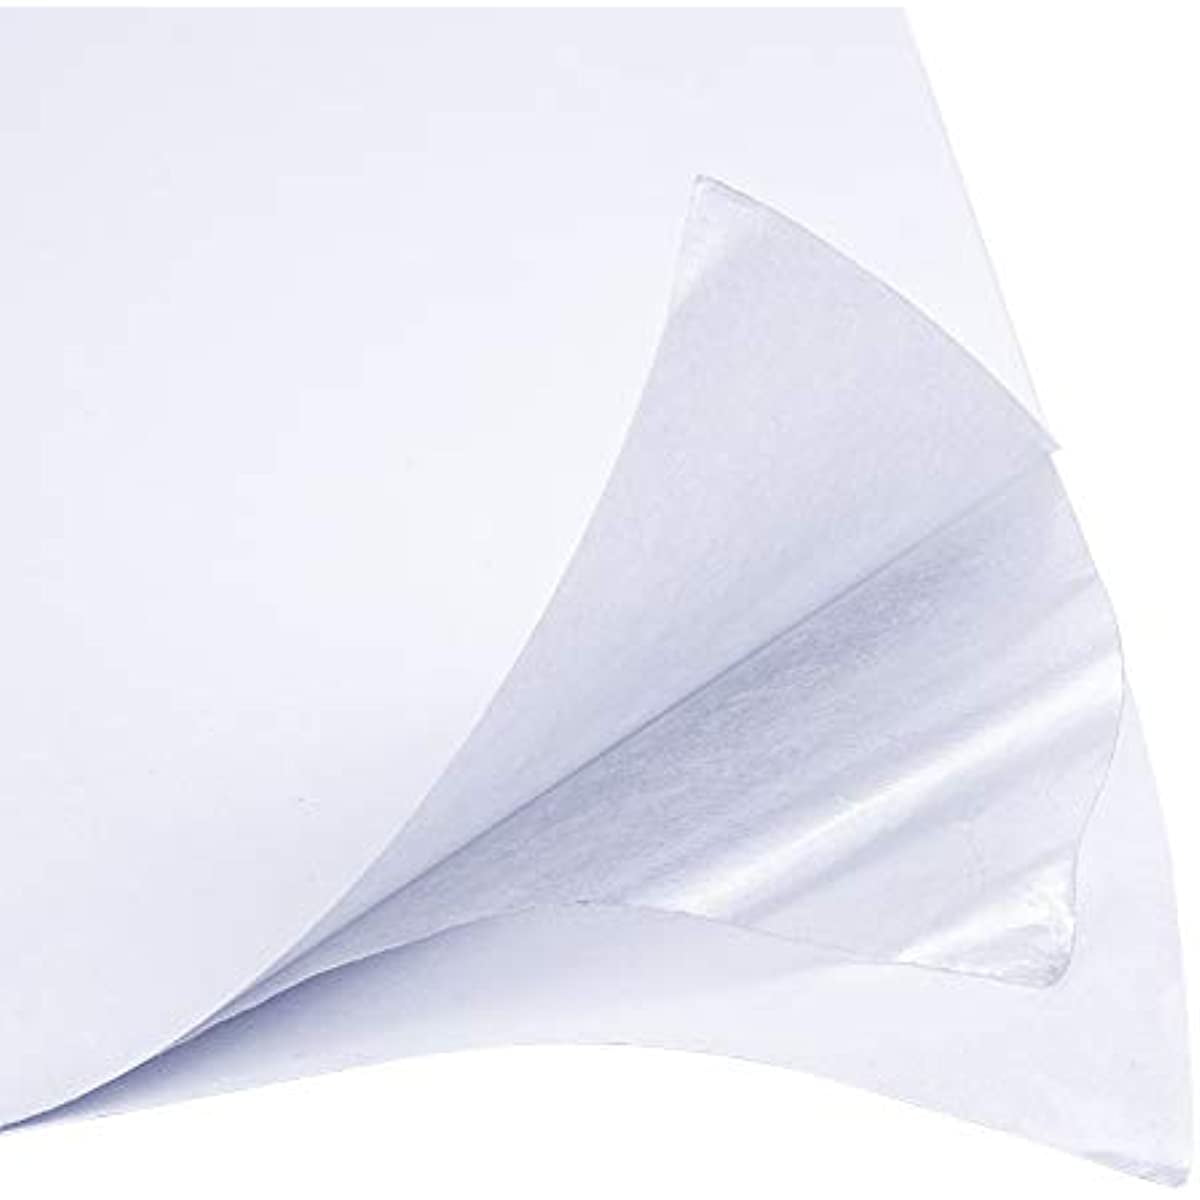 20 Sheet 8.3x5.7 inch Double Sided Sticky Sheets White Self Adhesive Tape (0.2mm) Sandwich Layer with Double Side Tape for Gift Wrapping Paper Craft